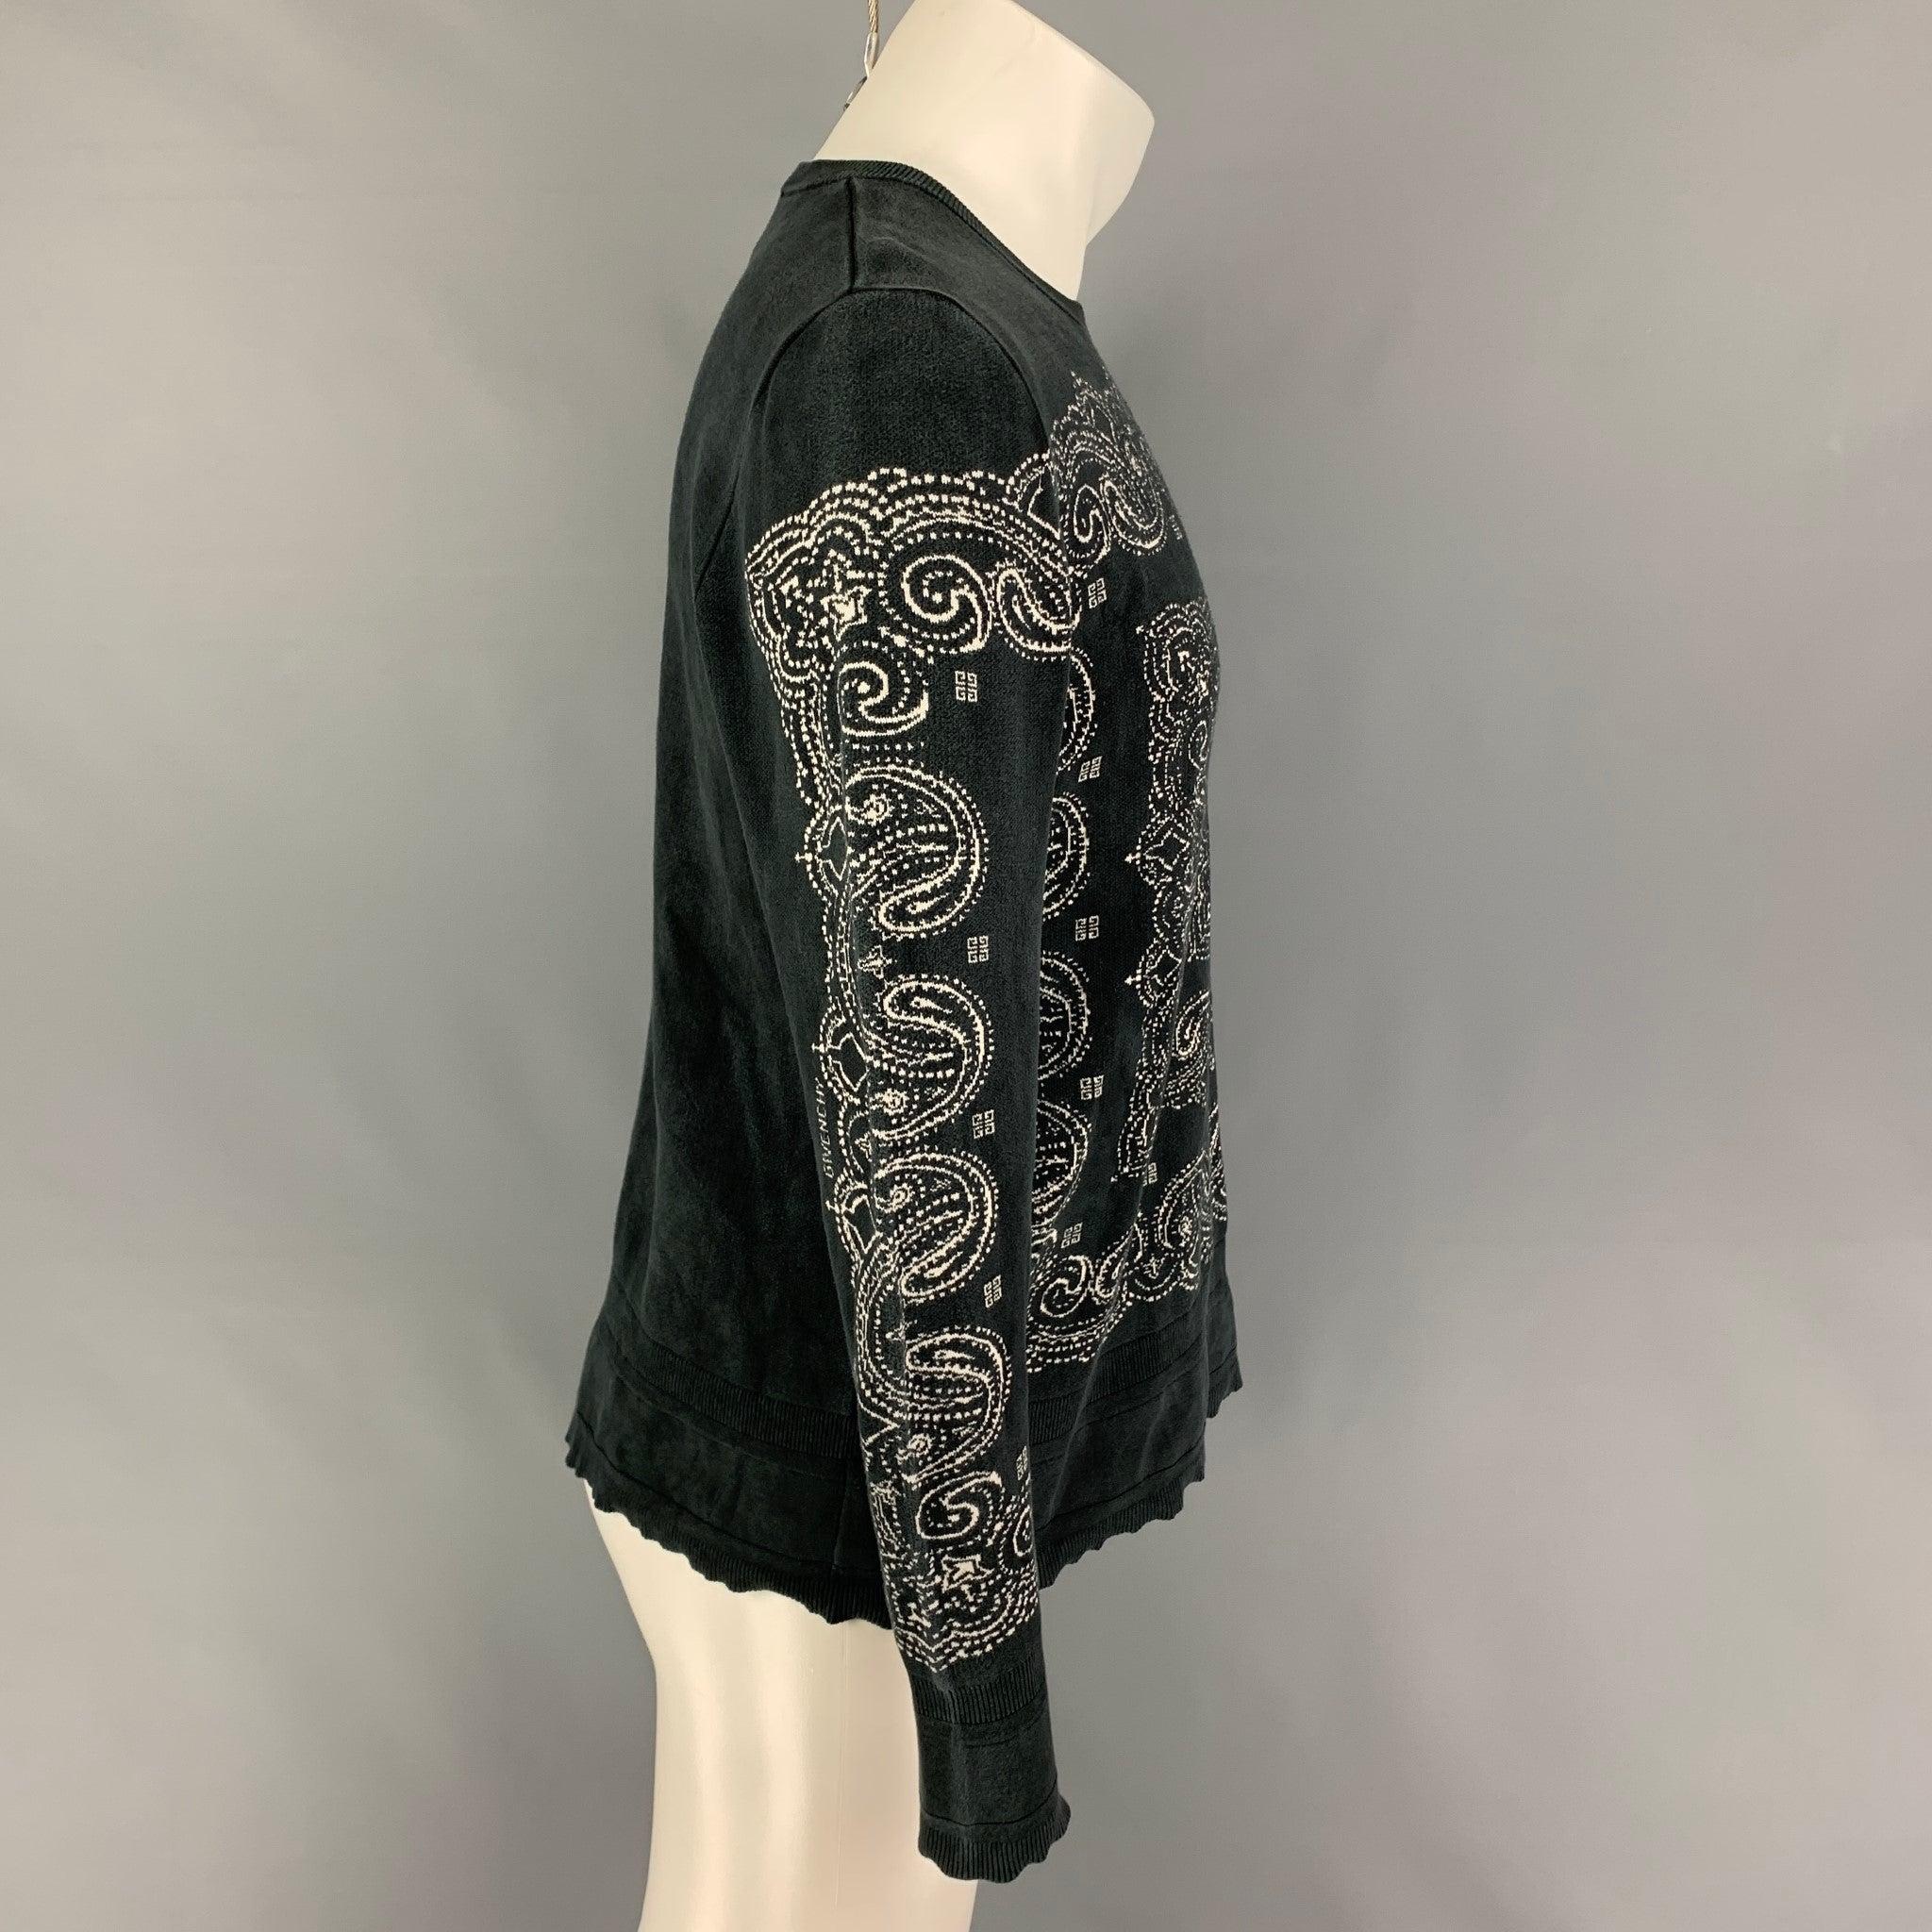 GIVENCHY pullover comes in a black & white silk featuring a paisley print throughout, distressed, and a crew-neck. Made in England.
Good
Pre-Owned Condition. 

Marked:   S 

Measurements: 
 
Shoulder: 17 inches  Chest: 40 inches  Sleeve: 27 inches 